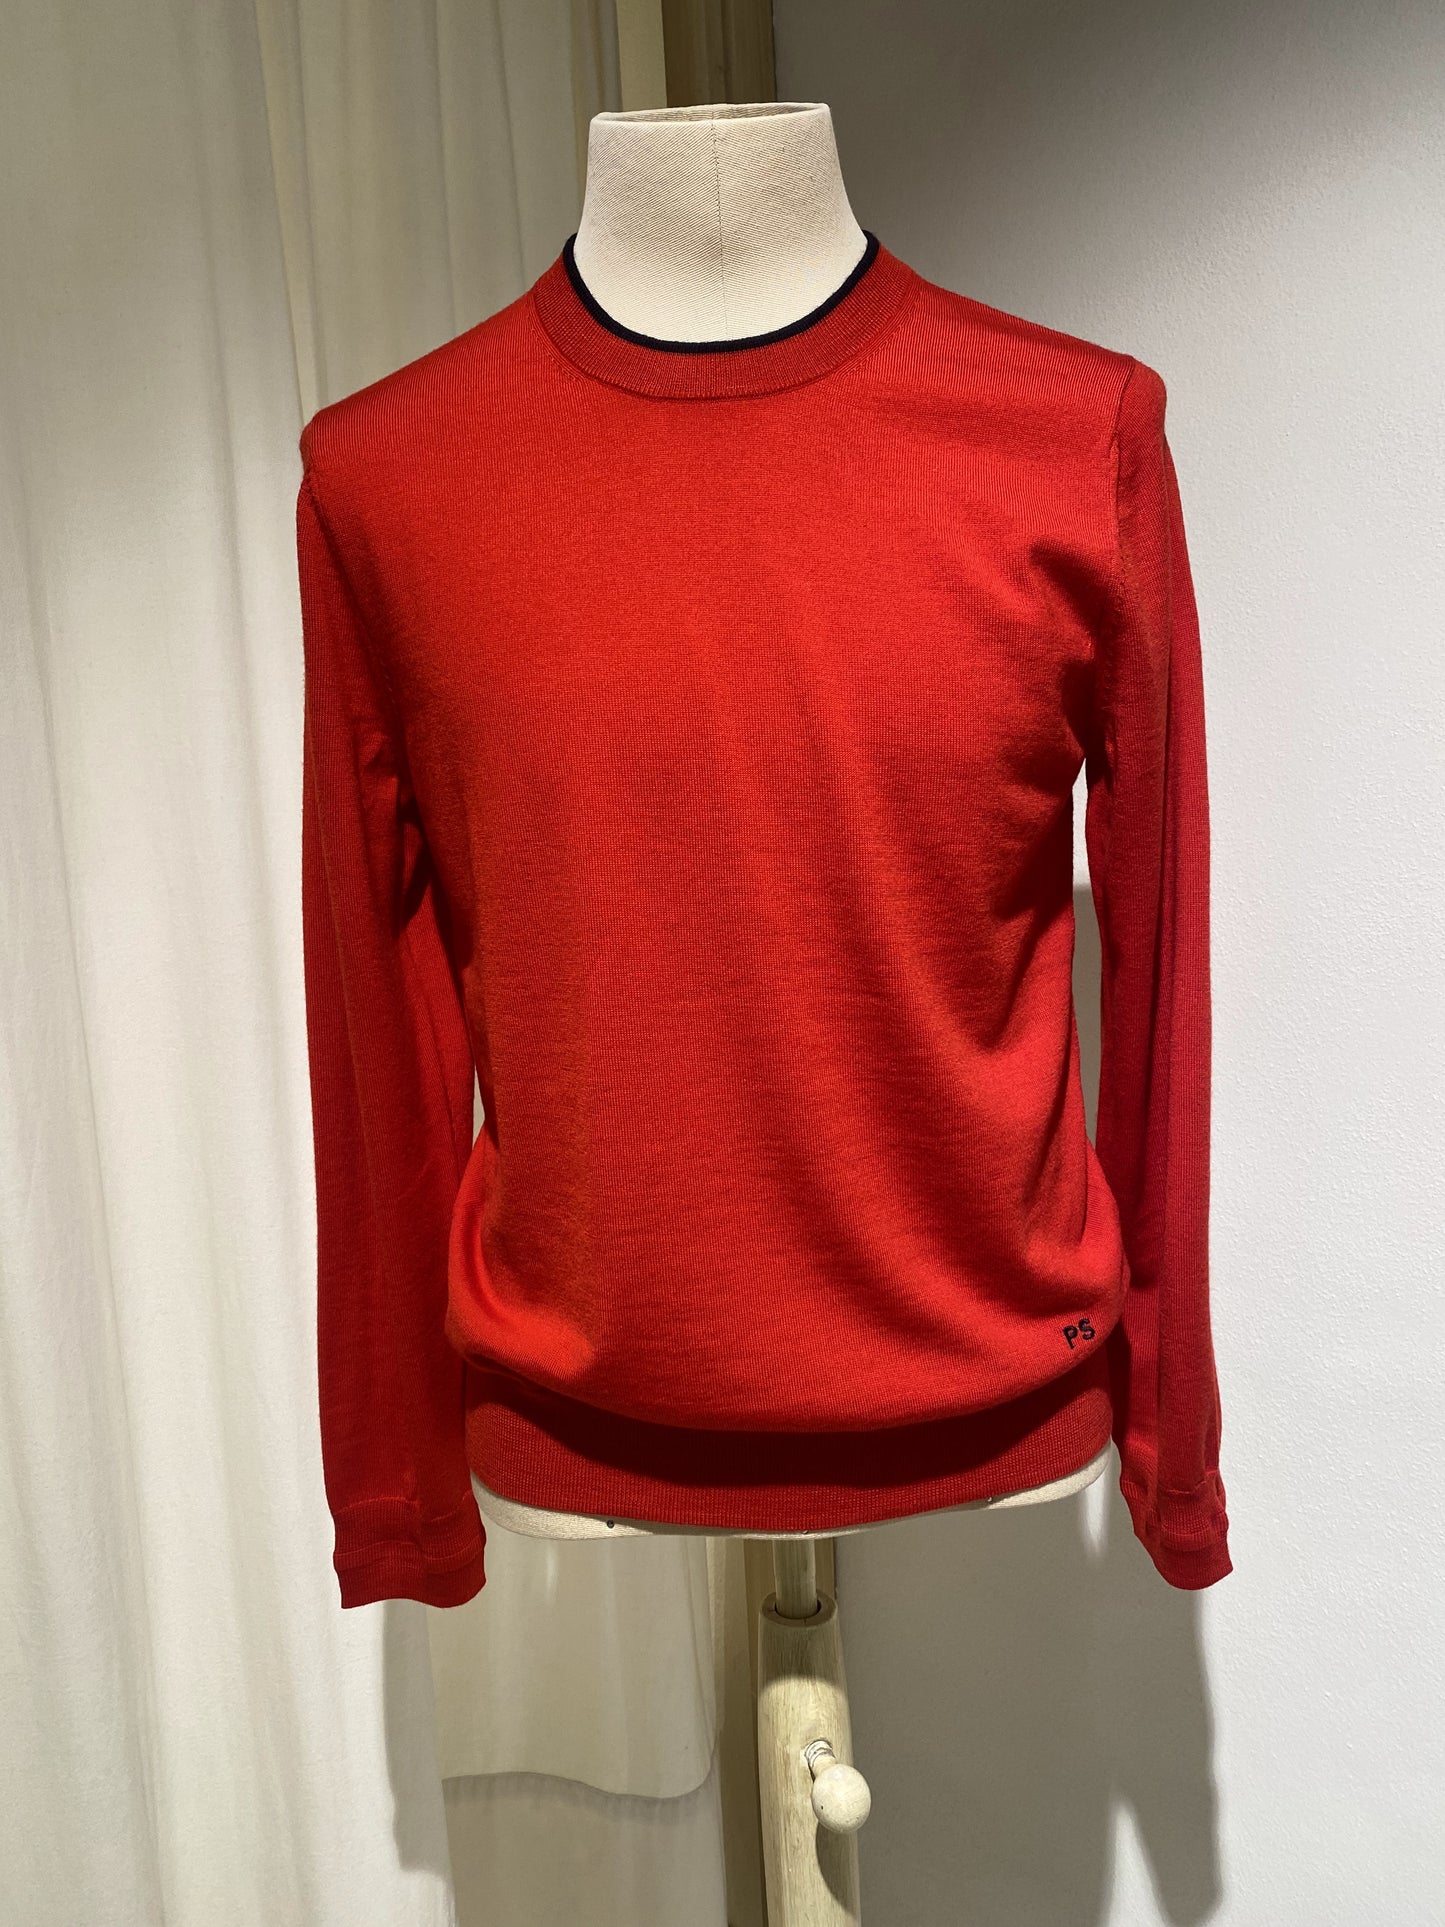 M KNITWEAR ROUND NECK PS PAUL SMITH RED